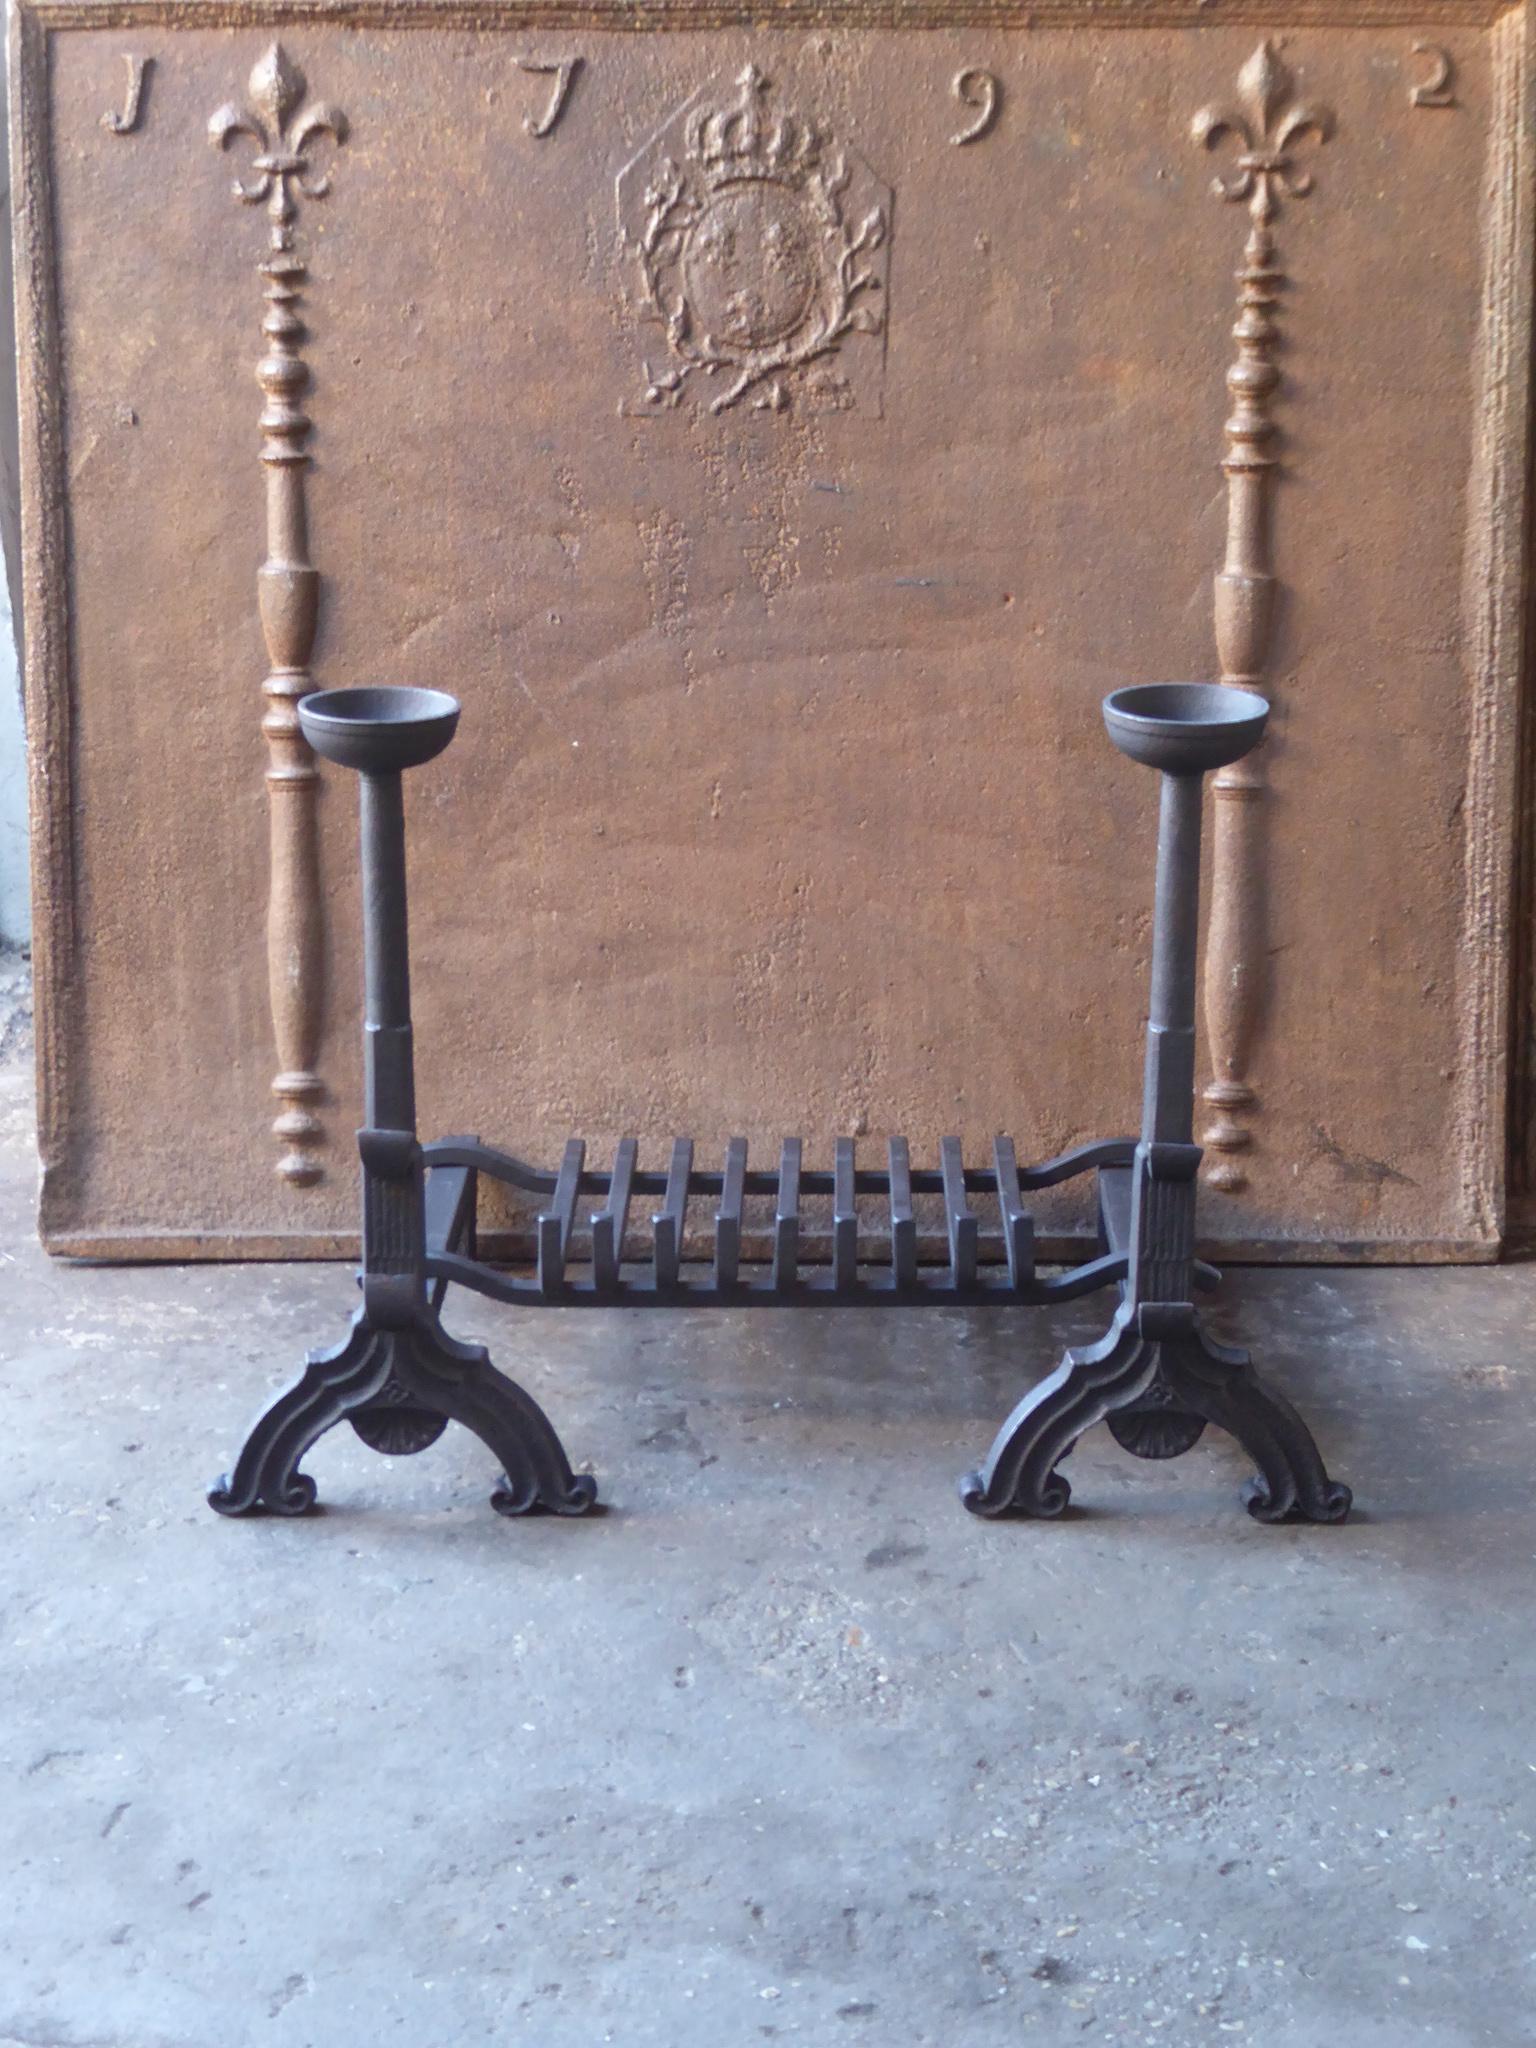 20th century French Neo-gothic fireplace basket - fire basket made of wrought iron and cast iron. The basket is in a good condition and is fully functional. The total width of the front of the fireplace grate is 70.0 cm or 27.6 inch.